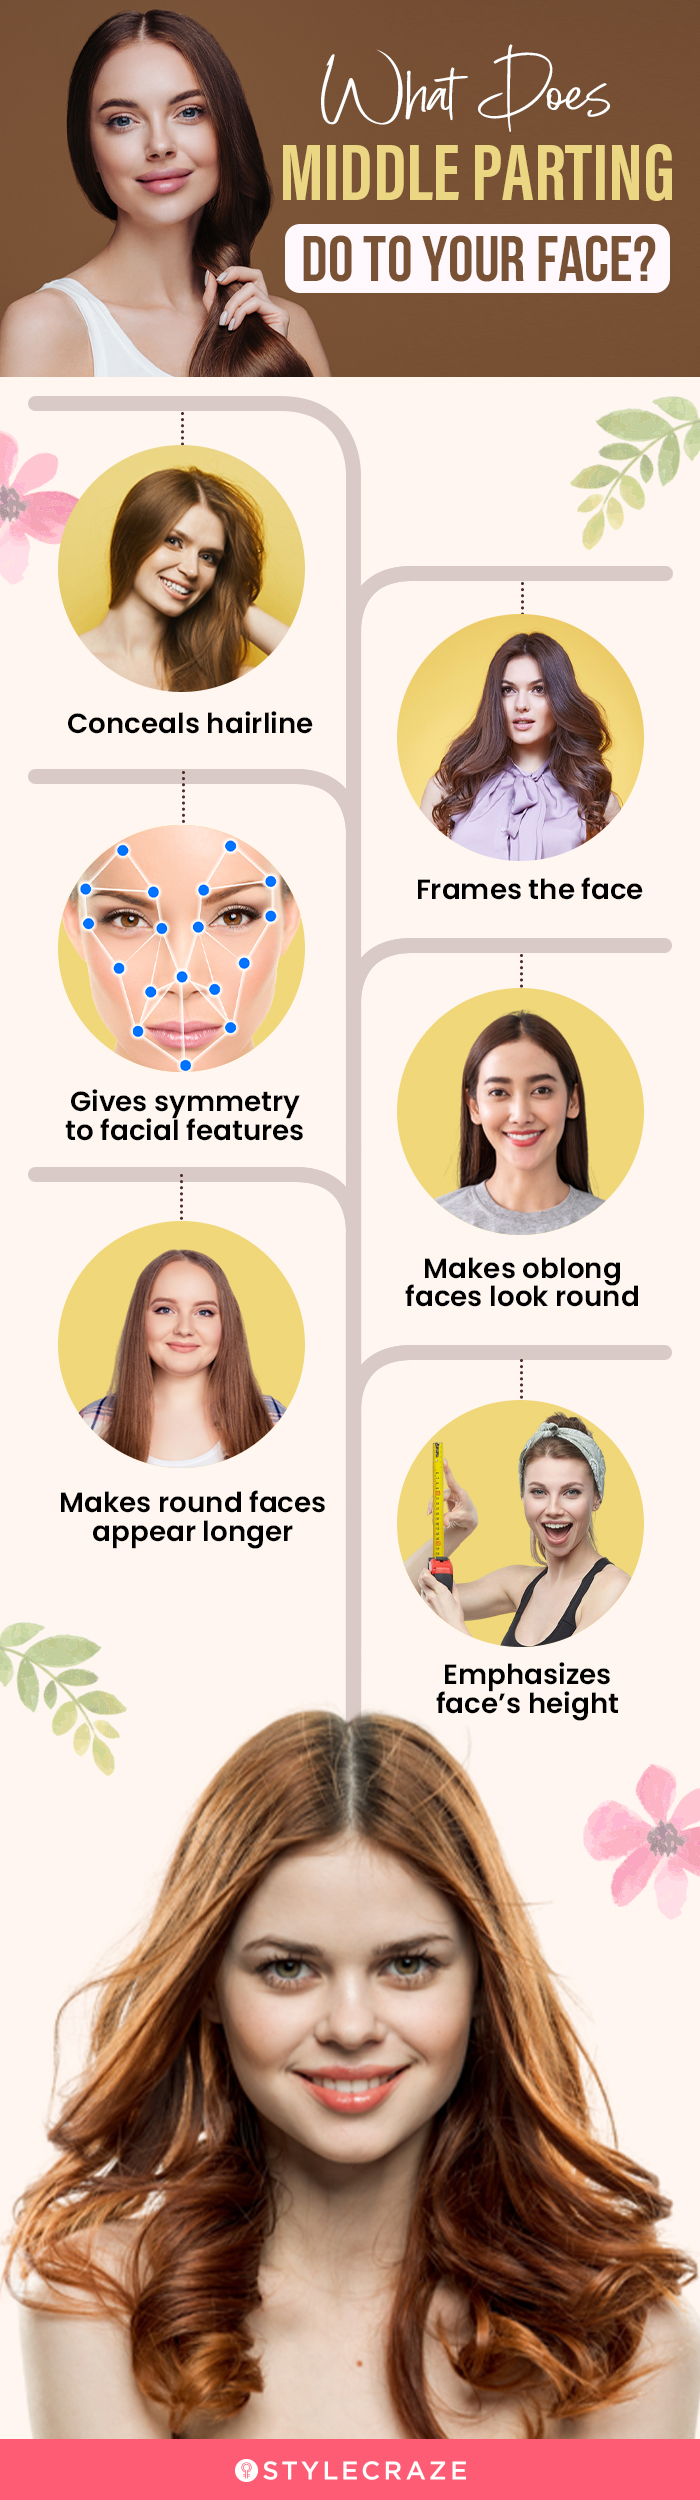 what does middle parting do to your face (infographic)